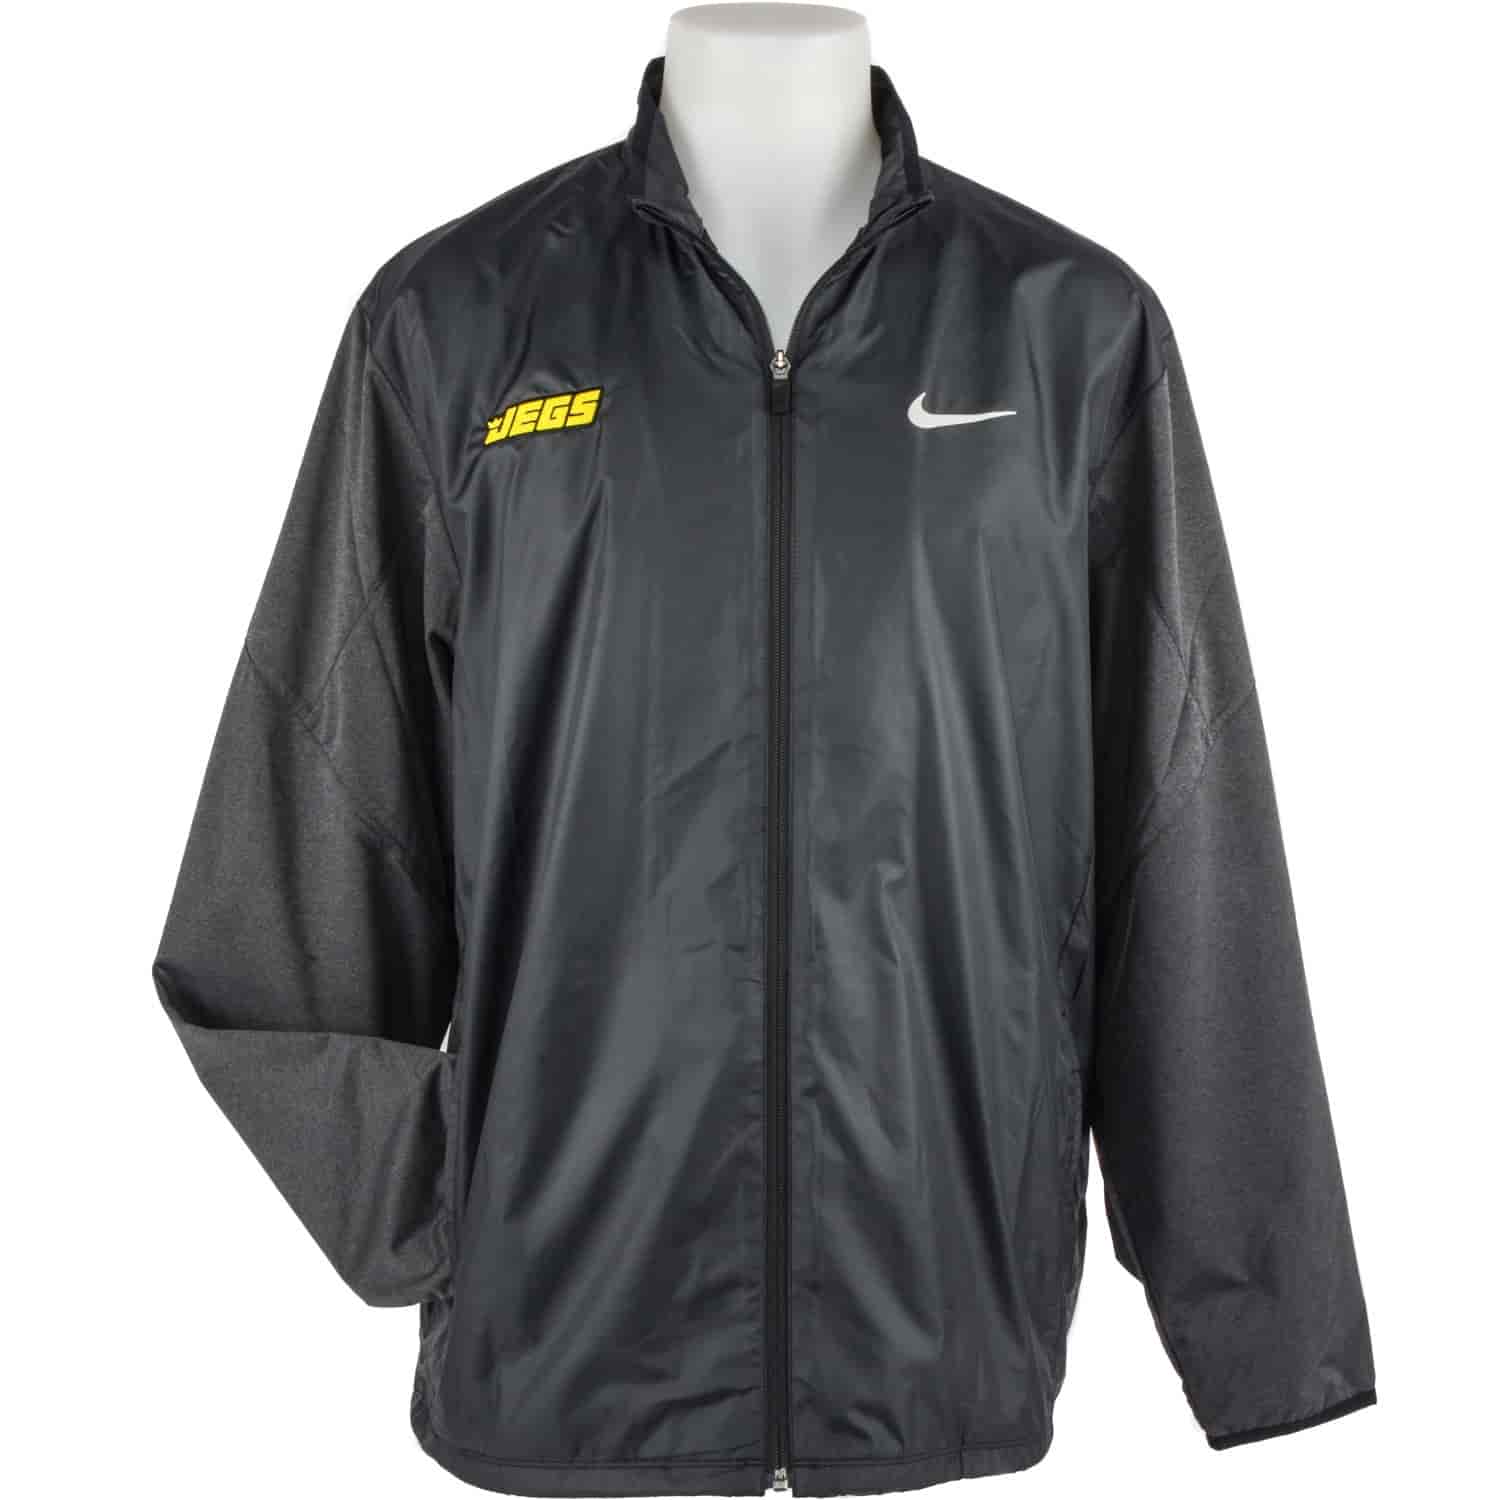 JEGS Nike Full-Zip Shield Jacket | JEGS Apparel and Collectibles - JEGS  High Performance